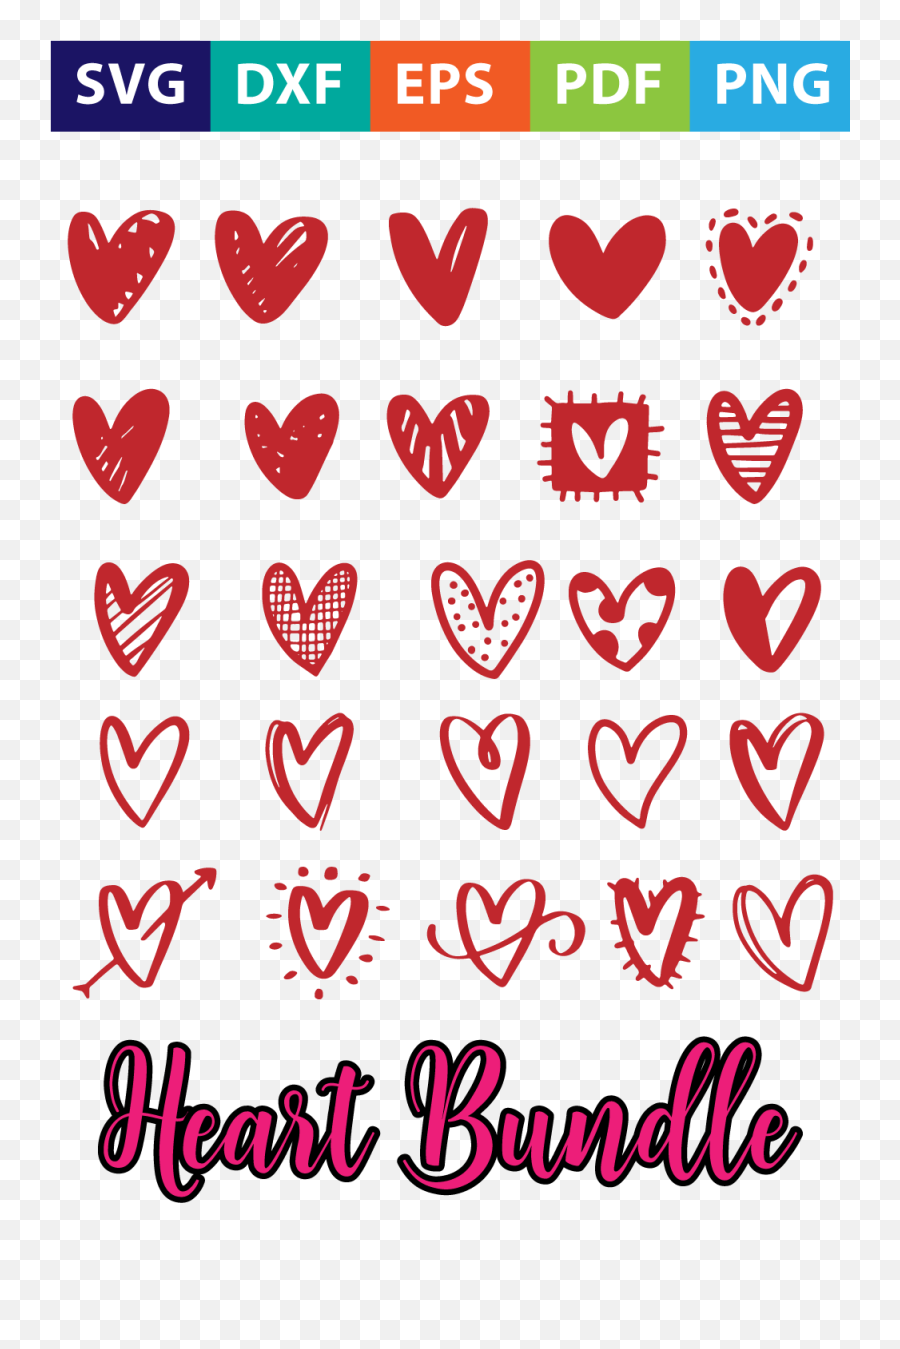 Heart Bundle Svg In 2021 How To Draw Hands Heart Hands - Girly Emoji,Hand Drawn Heart Png